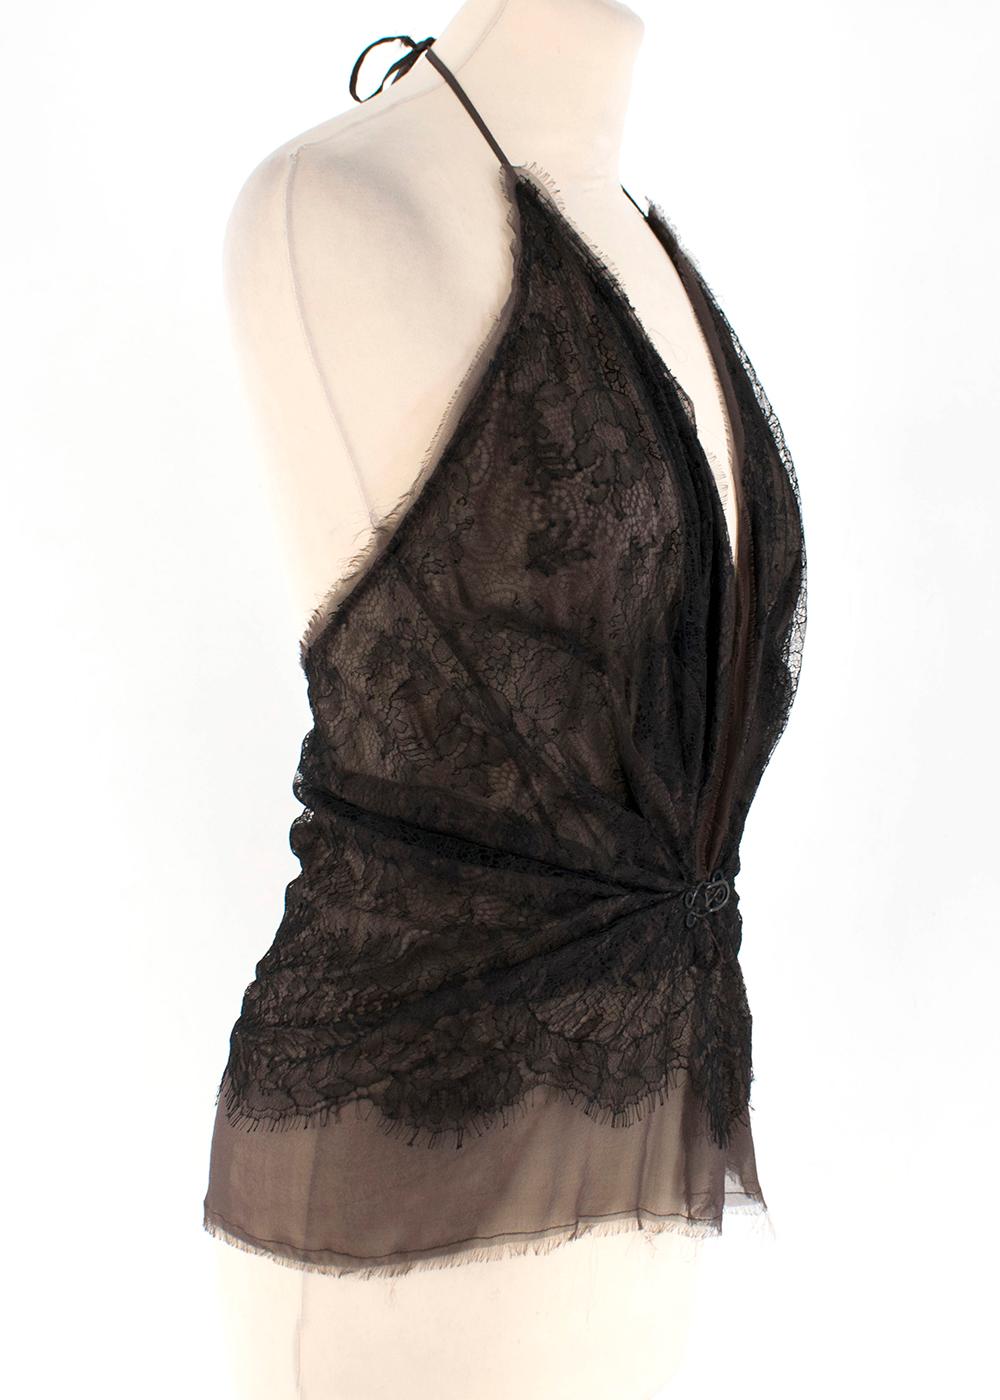 Lanvin brown/black halterneck lace top with hook fastening.

Measurements are taken with the item lying flat, seam to seam.

Length:64cm